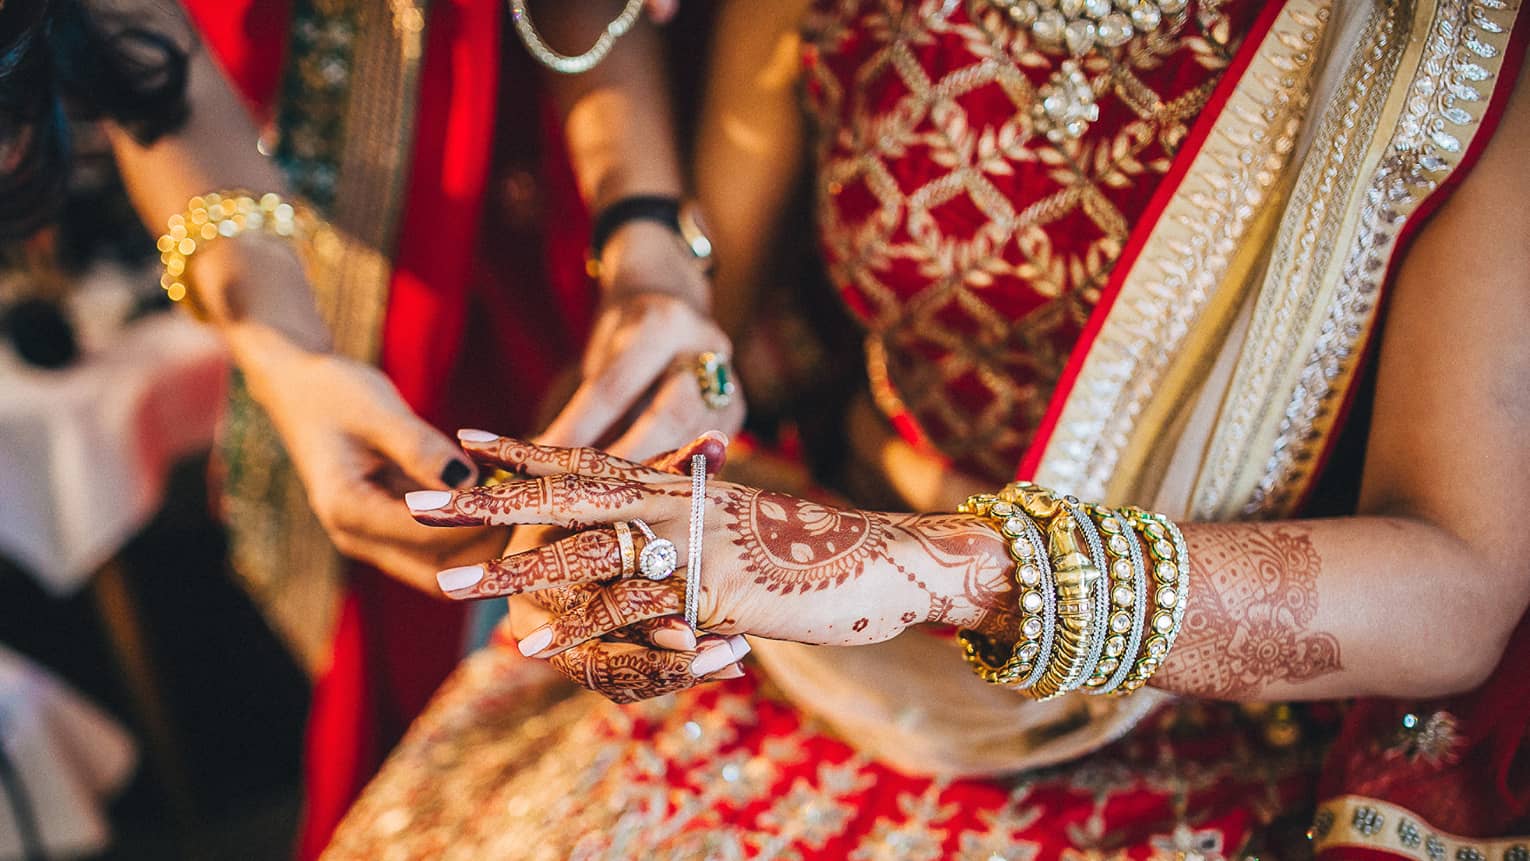 Bridal party, woman's hands decorated with henna paints